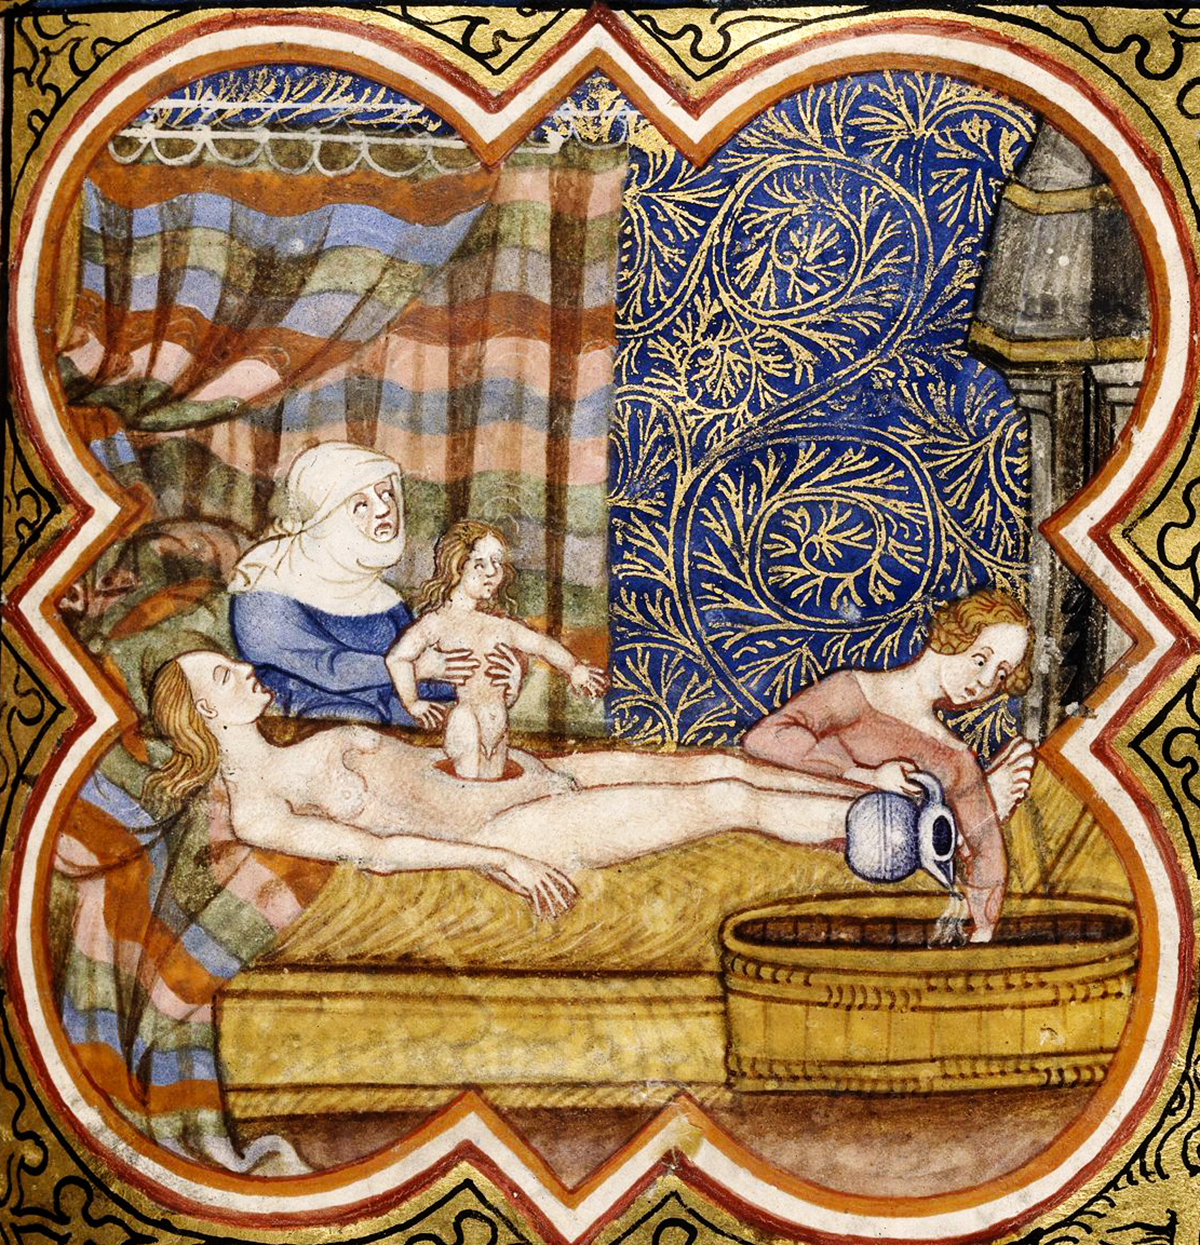 A detailed medieval illustration from the last quarter of the 14th century depicting a birthing scene. In the center, a woman lies on a raised bed, supported by a midwife dressed in blue. A newborn child is being held up by the midwife. To the right, another attendant pours water from a pitcher into a basin, possibly preparing for a post-birth ritual or cleaning. The backdrop includes intricate blue and gold patterns framed by a red and gold border. The scene provides insight into childbirth practices and the roles of attendants during the medieval period.